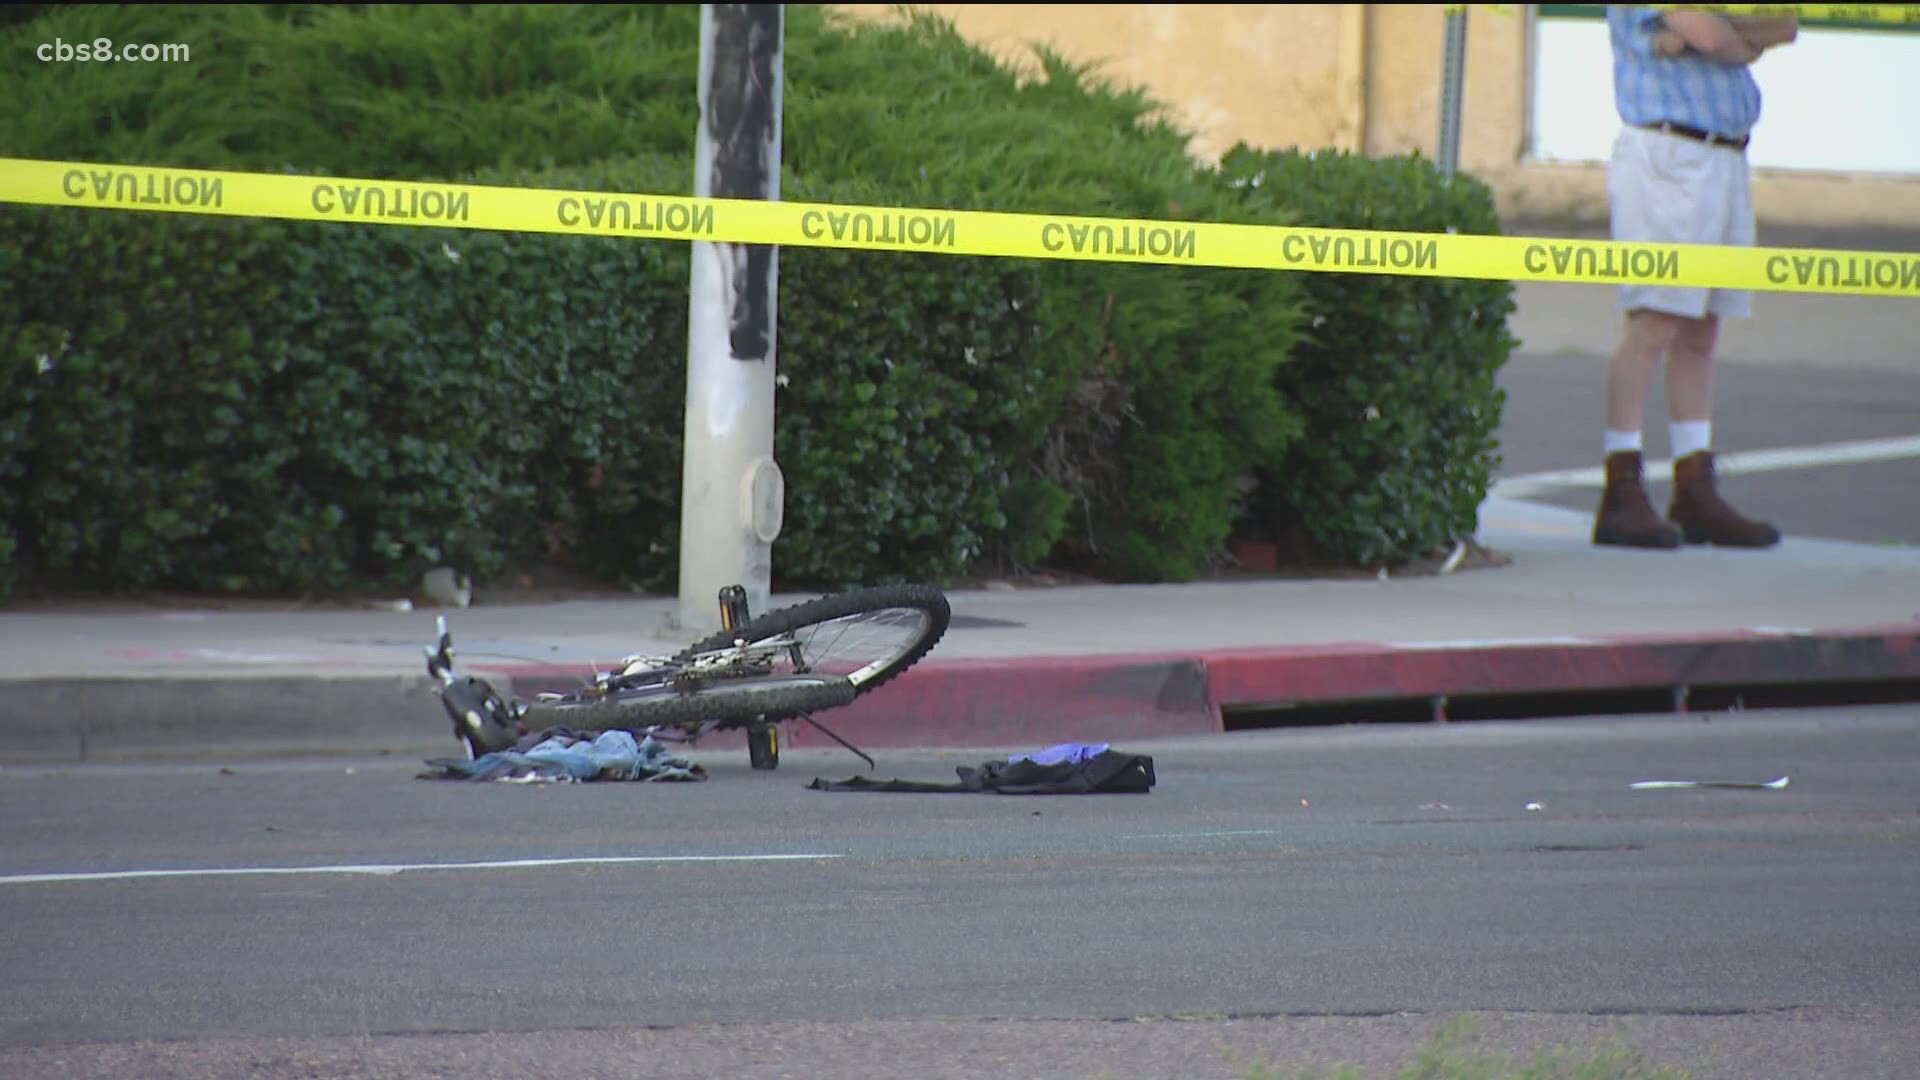 A cyclist was killed by a hit-and-run driver in a Toyota Prius near University Avenue and Alamo Drive in the Rolando area of San Diego Tuesday night.